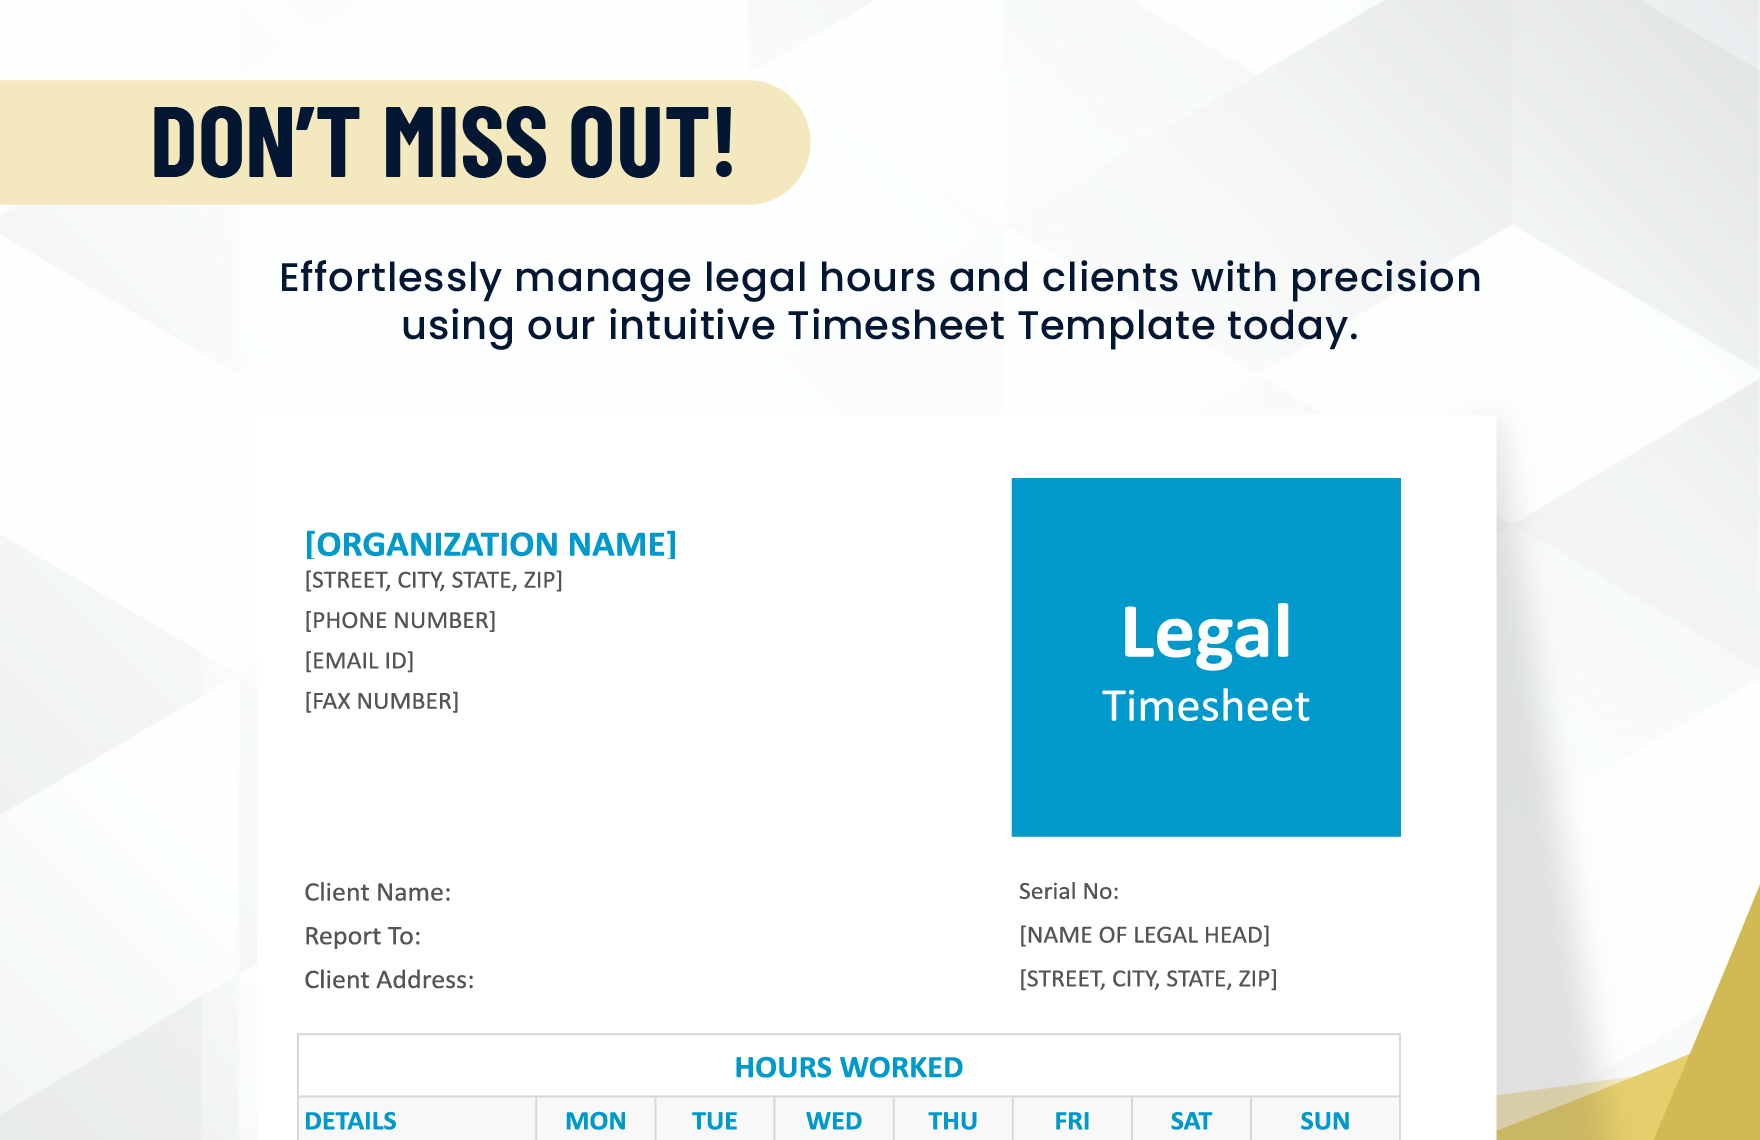 Sample Legal and Lawyer Timesheet Template